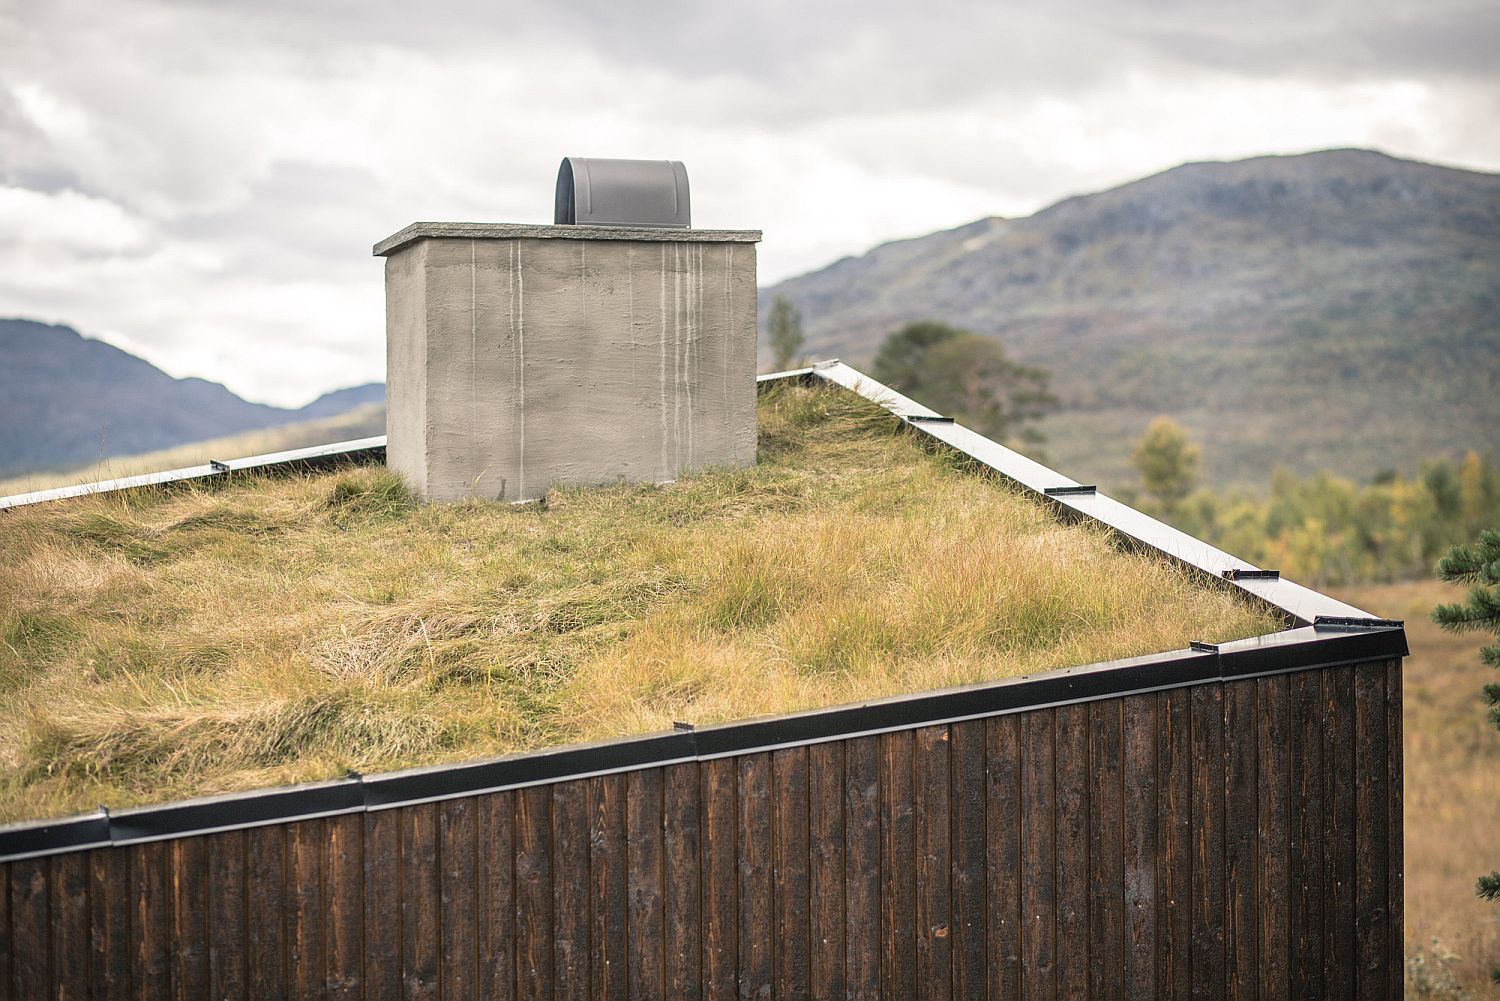 Green roof of Viewpoint Granasjøen allows it to blend in with the landscape